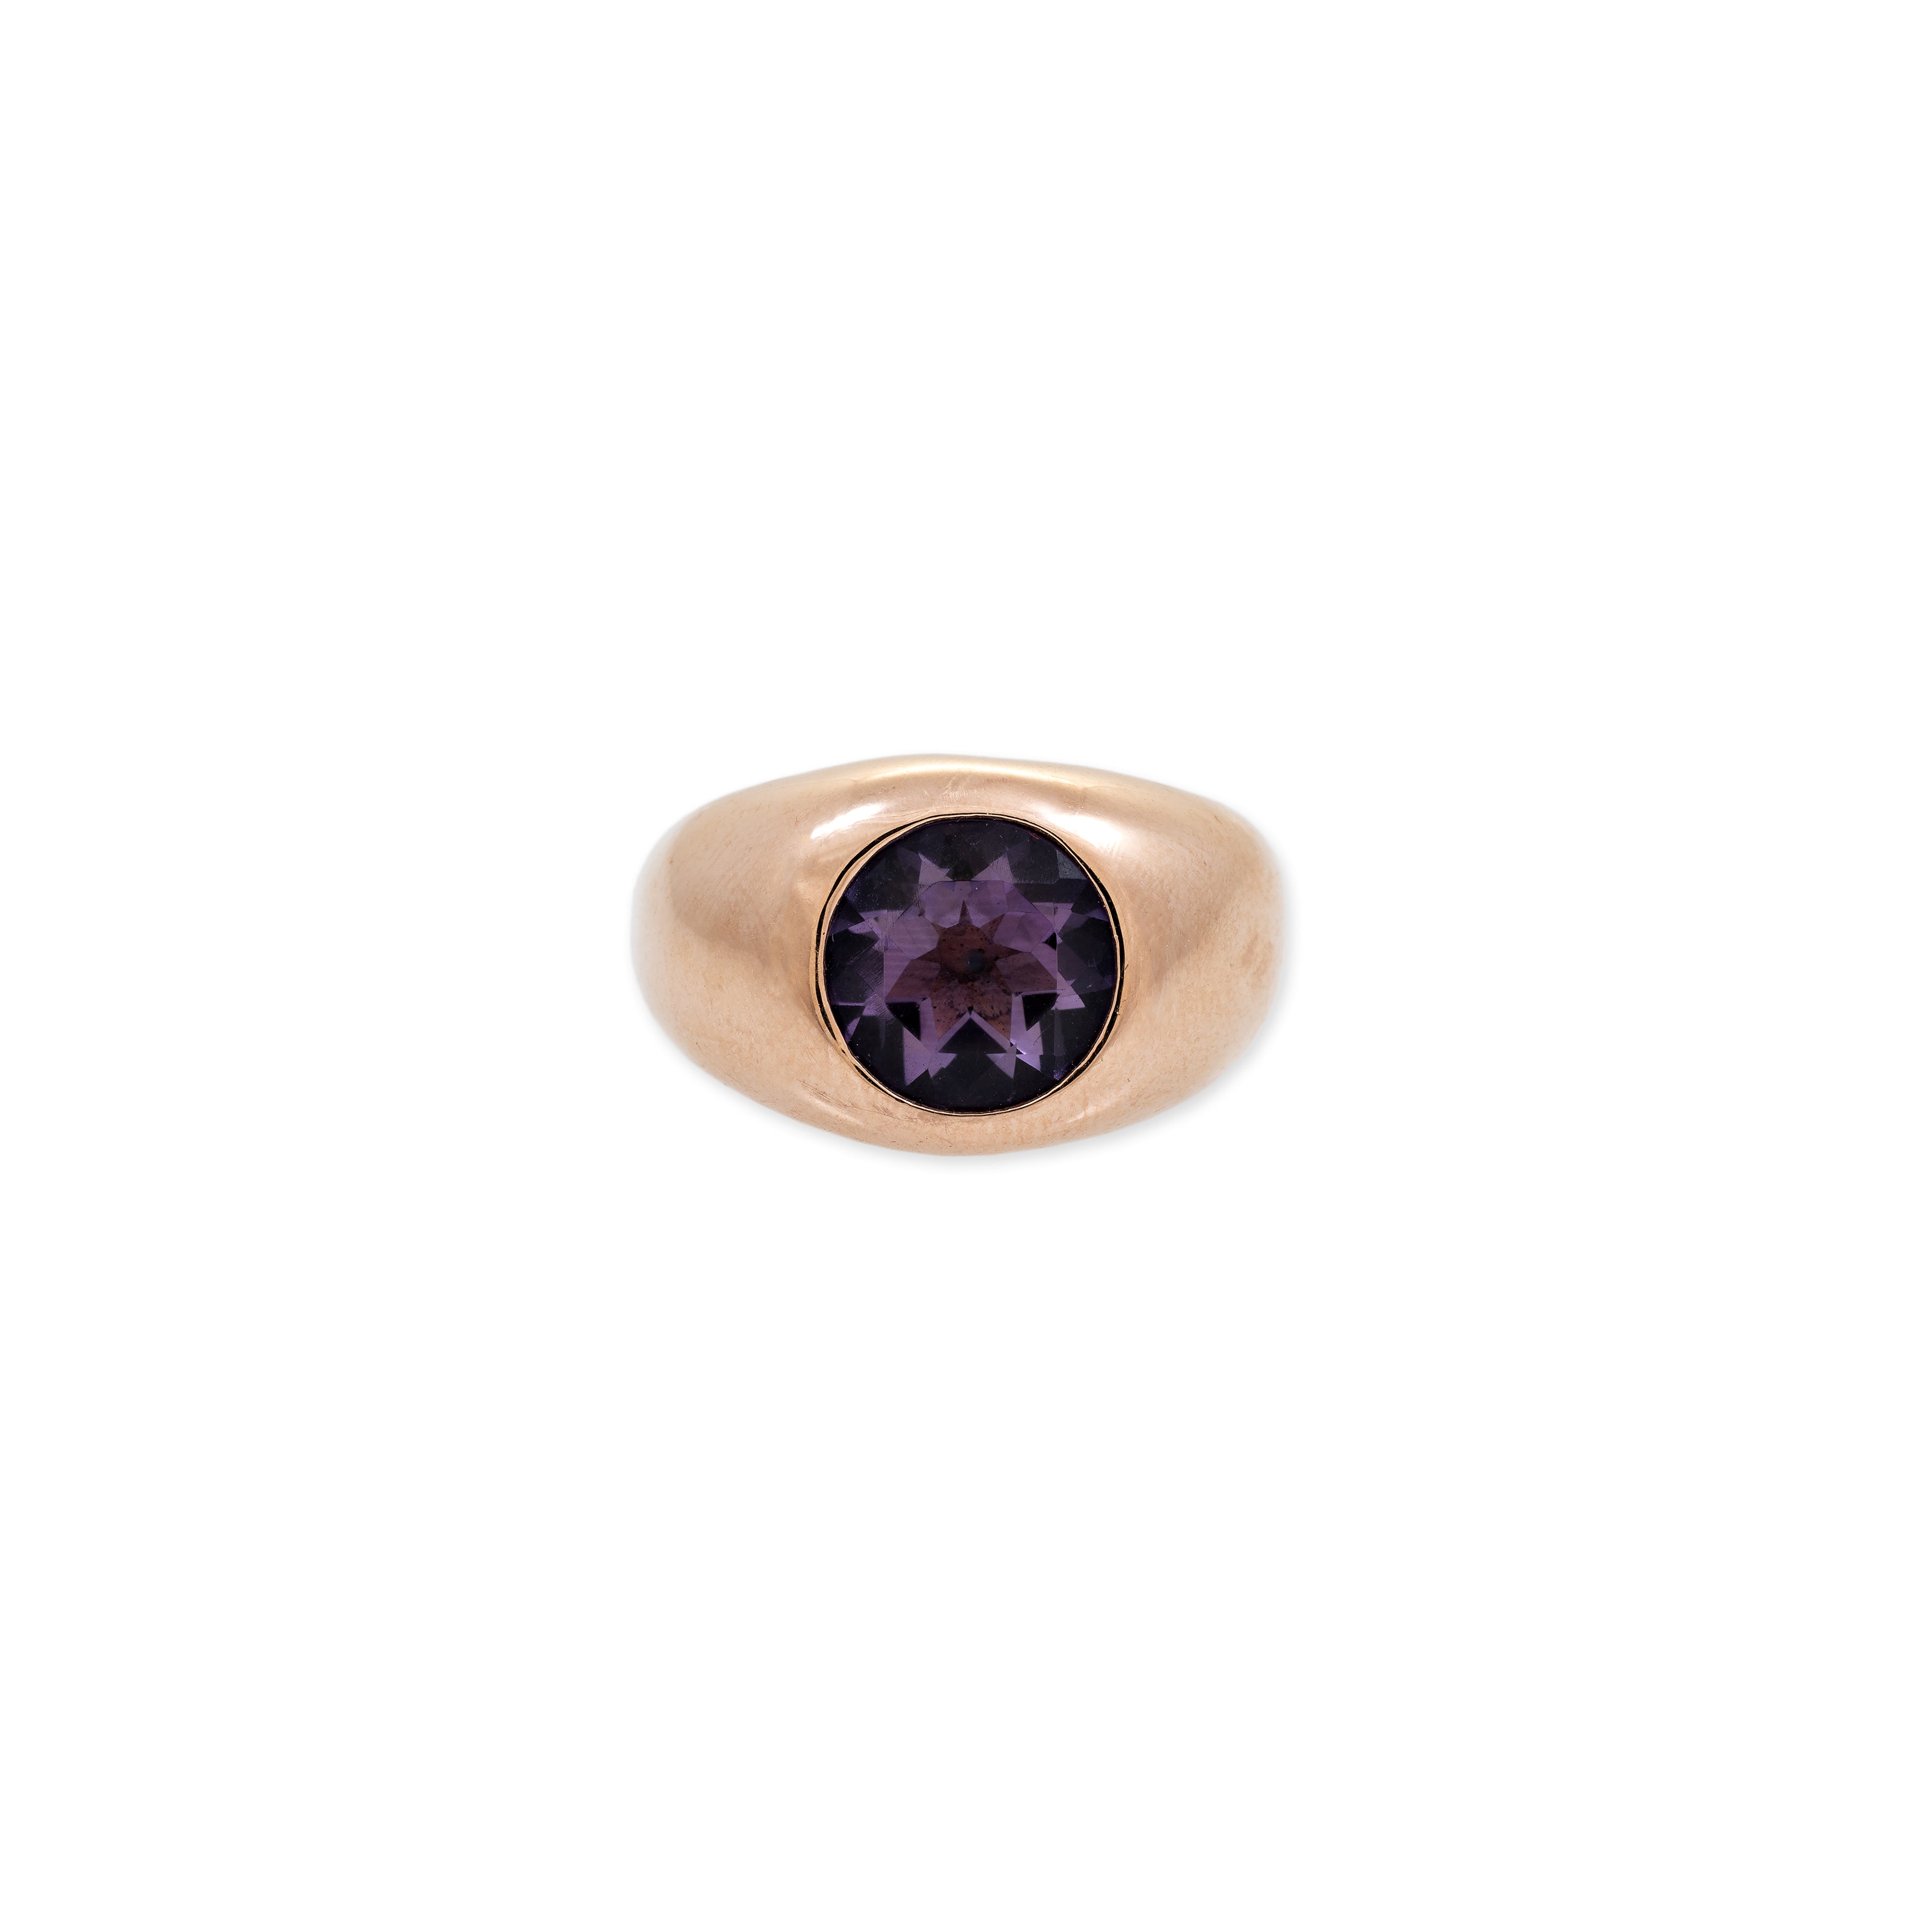 ROUND AMETHYST LARGE DOME RING